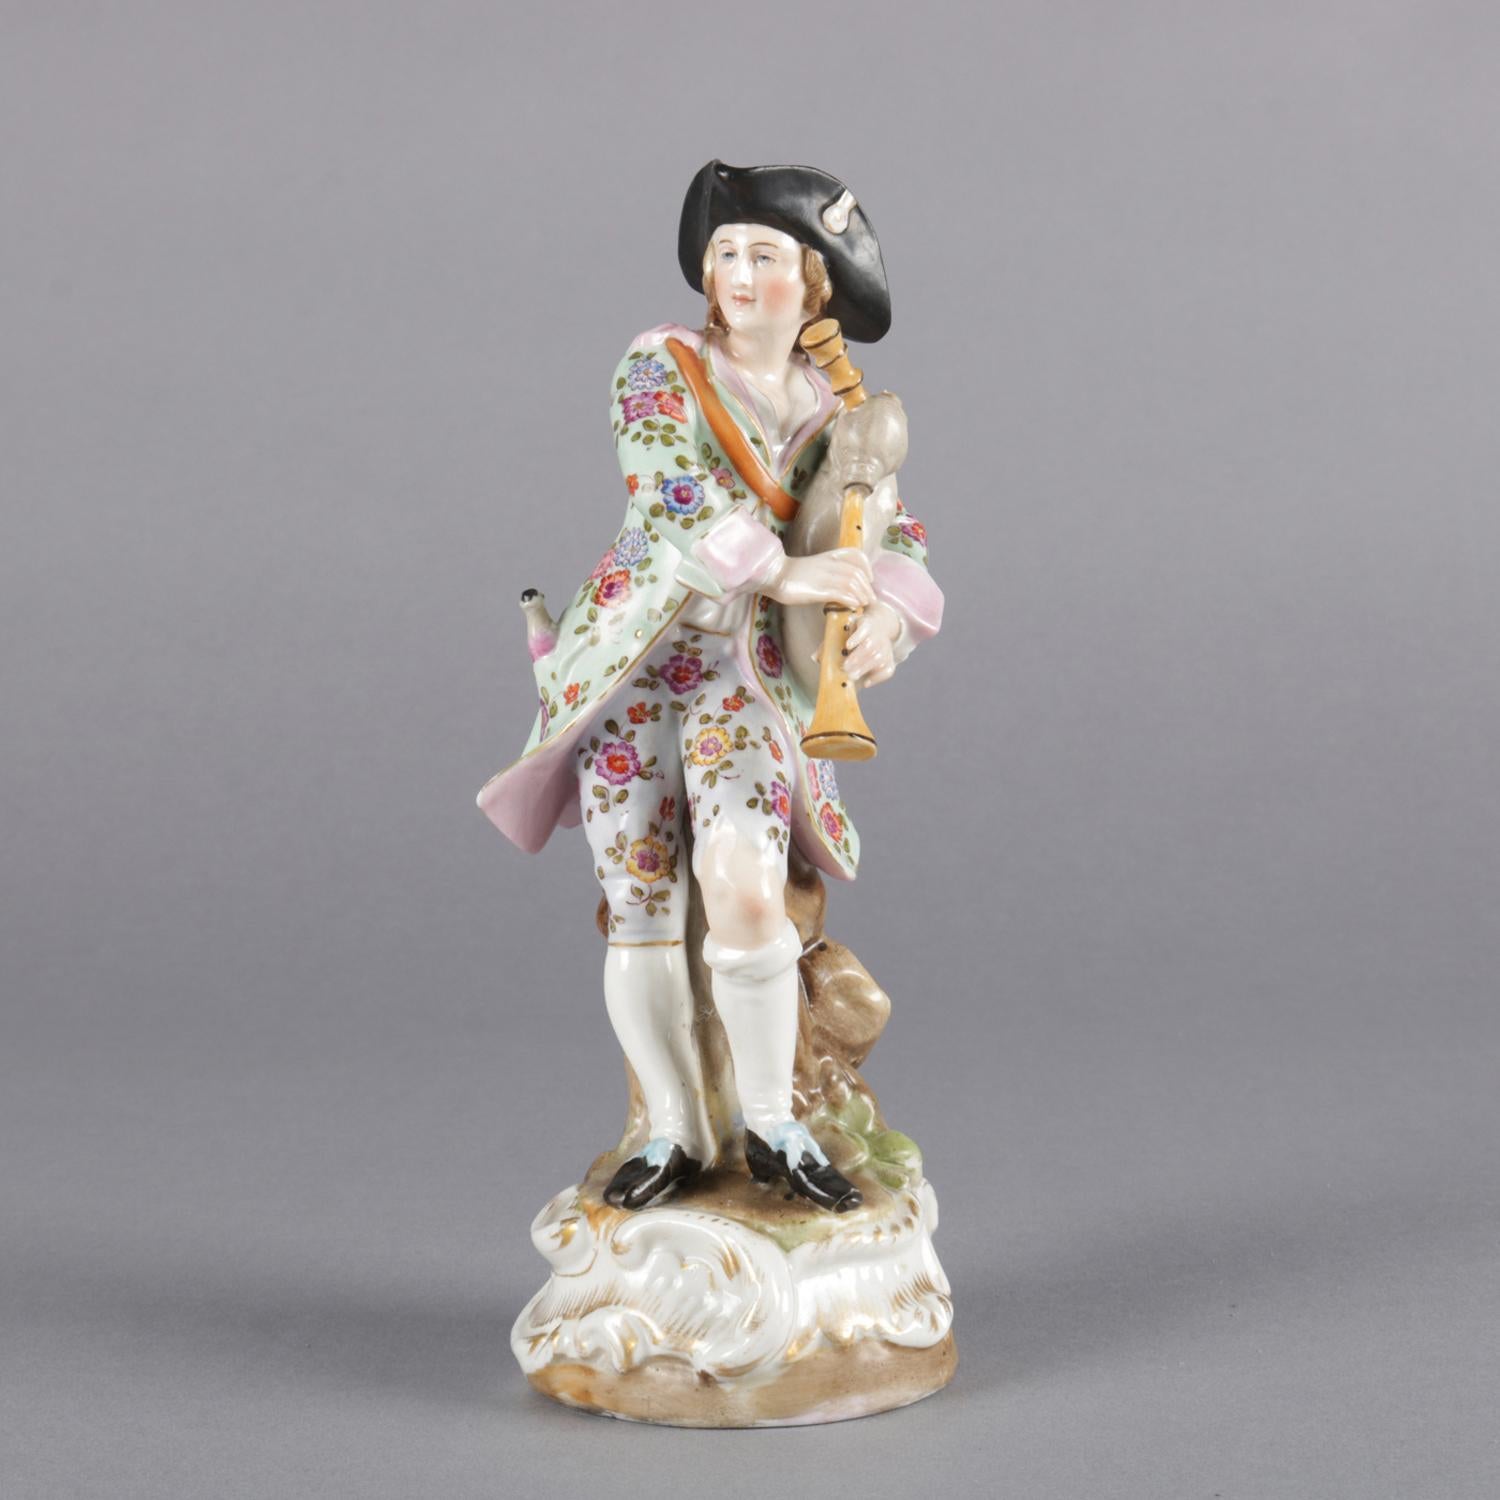 Antique German Meissen school hand painted and gilt figurine features bagpiper in countryside setting, marked on base as photographed, 19th century

Measures: 7.5